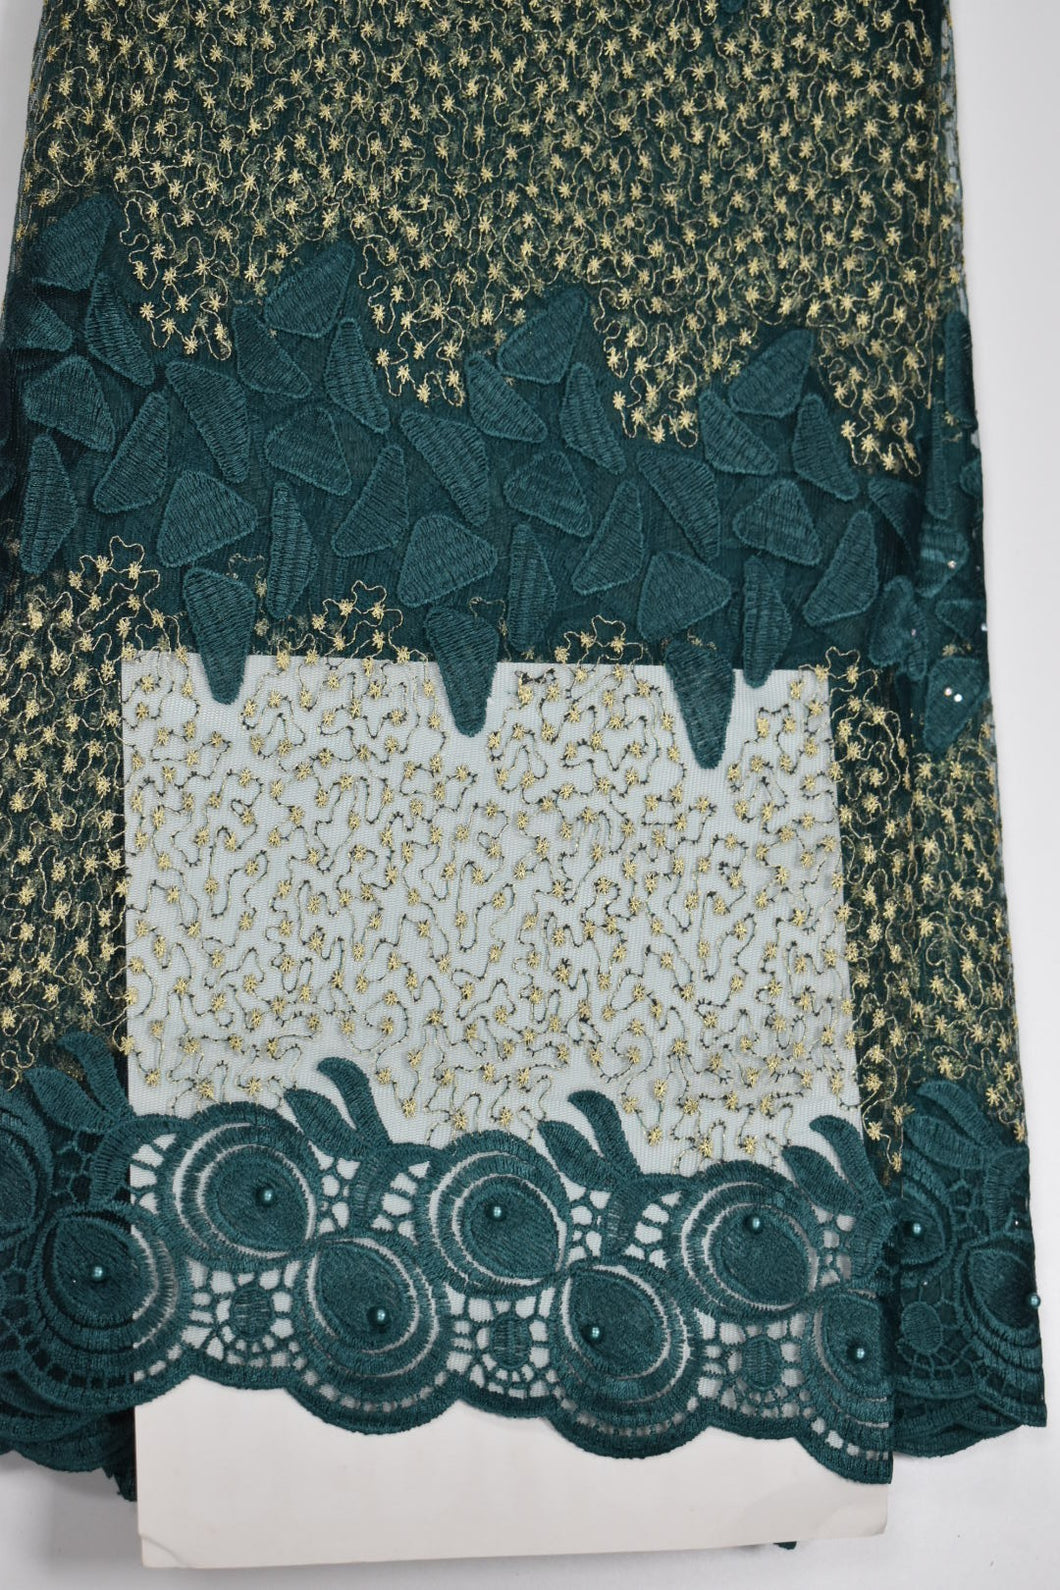 Emerald Green and Gold French Lace - 5 Yards